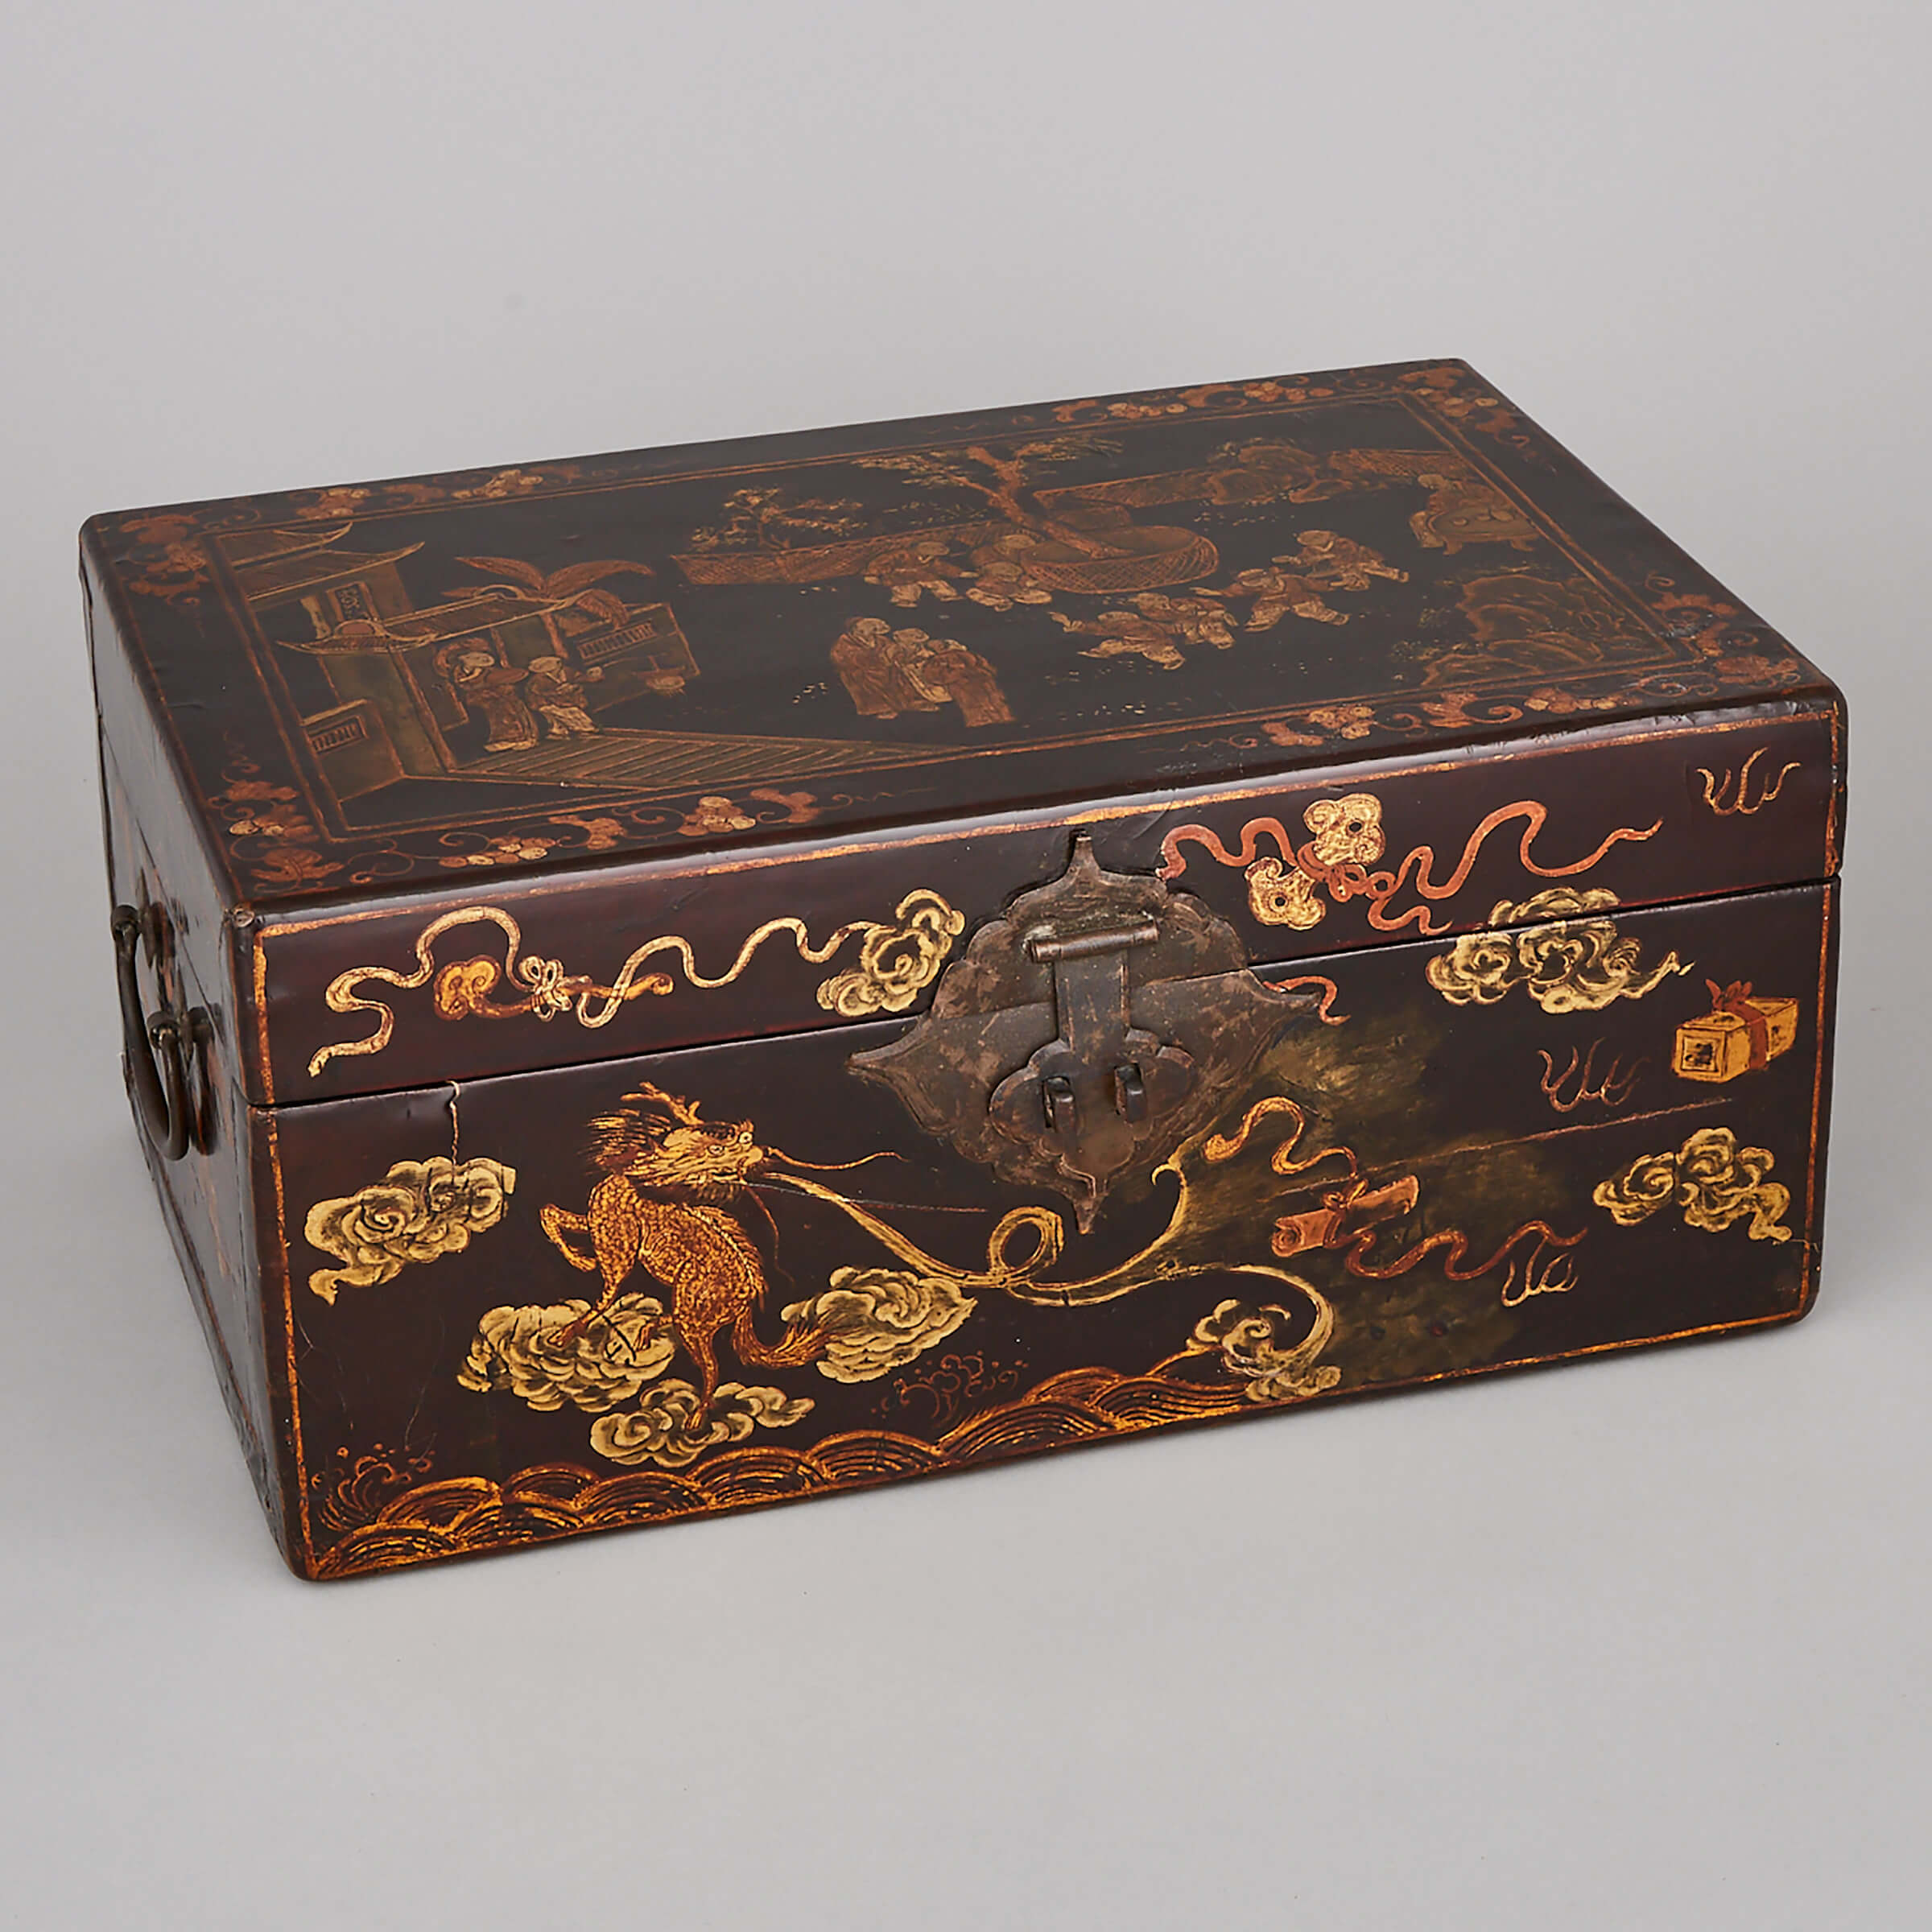 A Large Chinese Export Black Lacquer Box, 19th Century